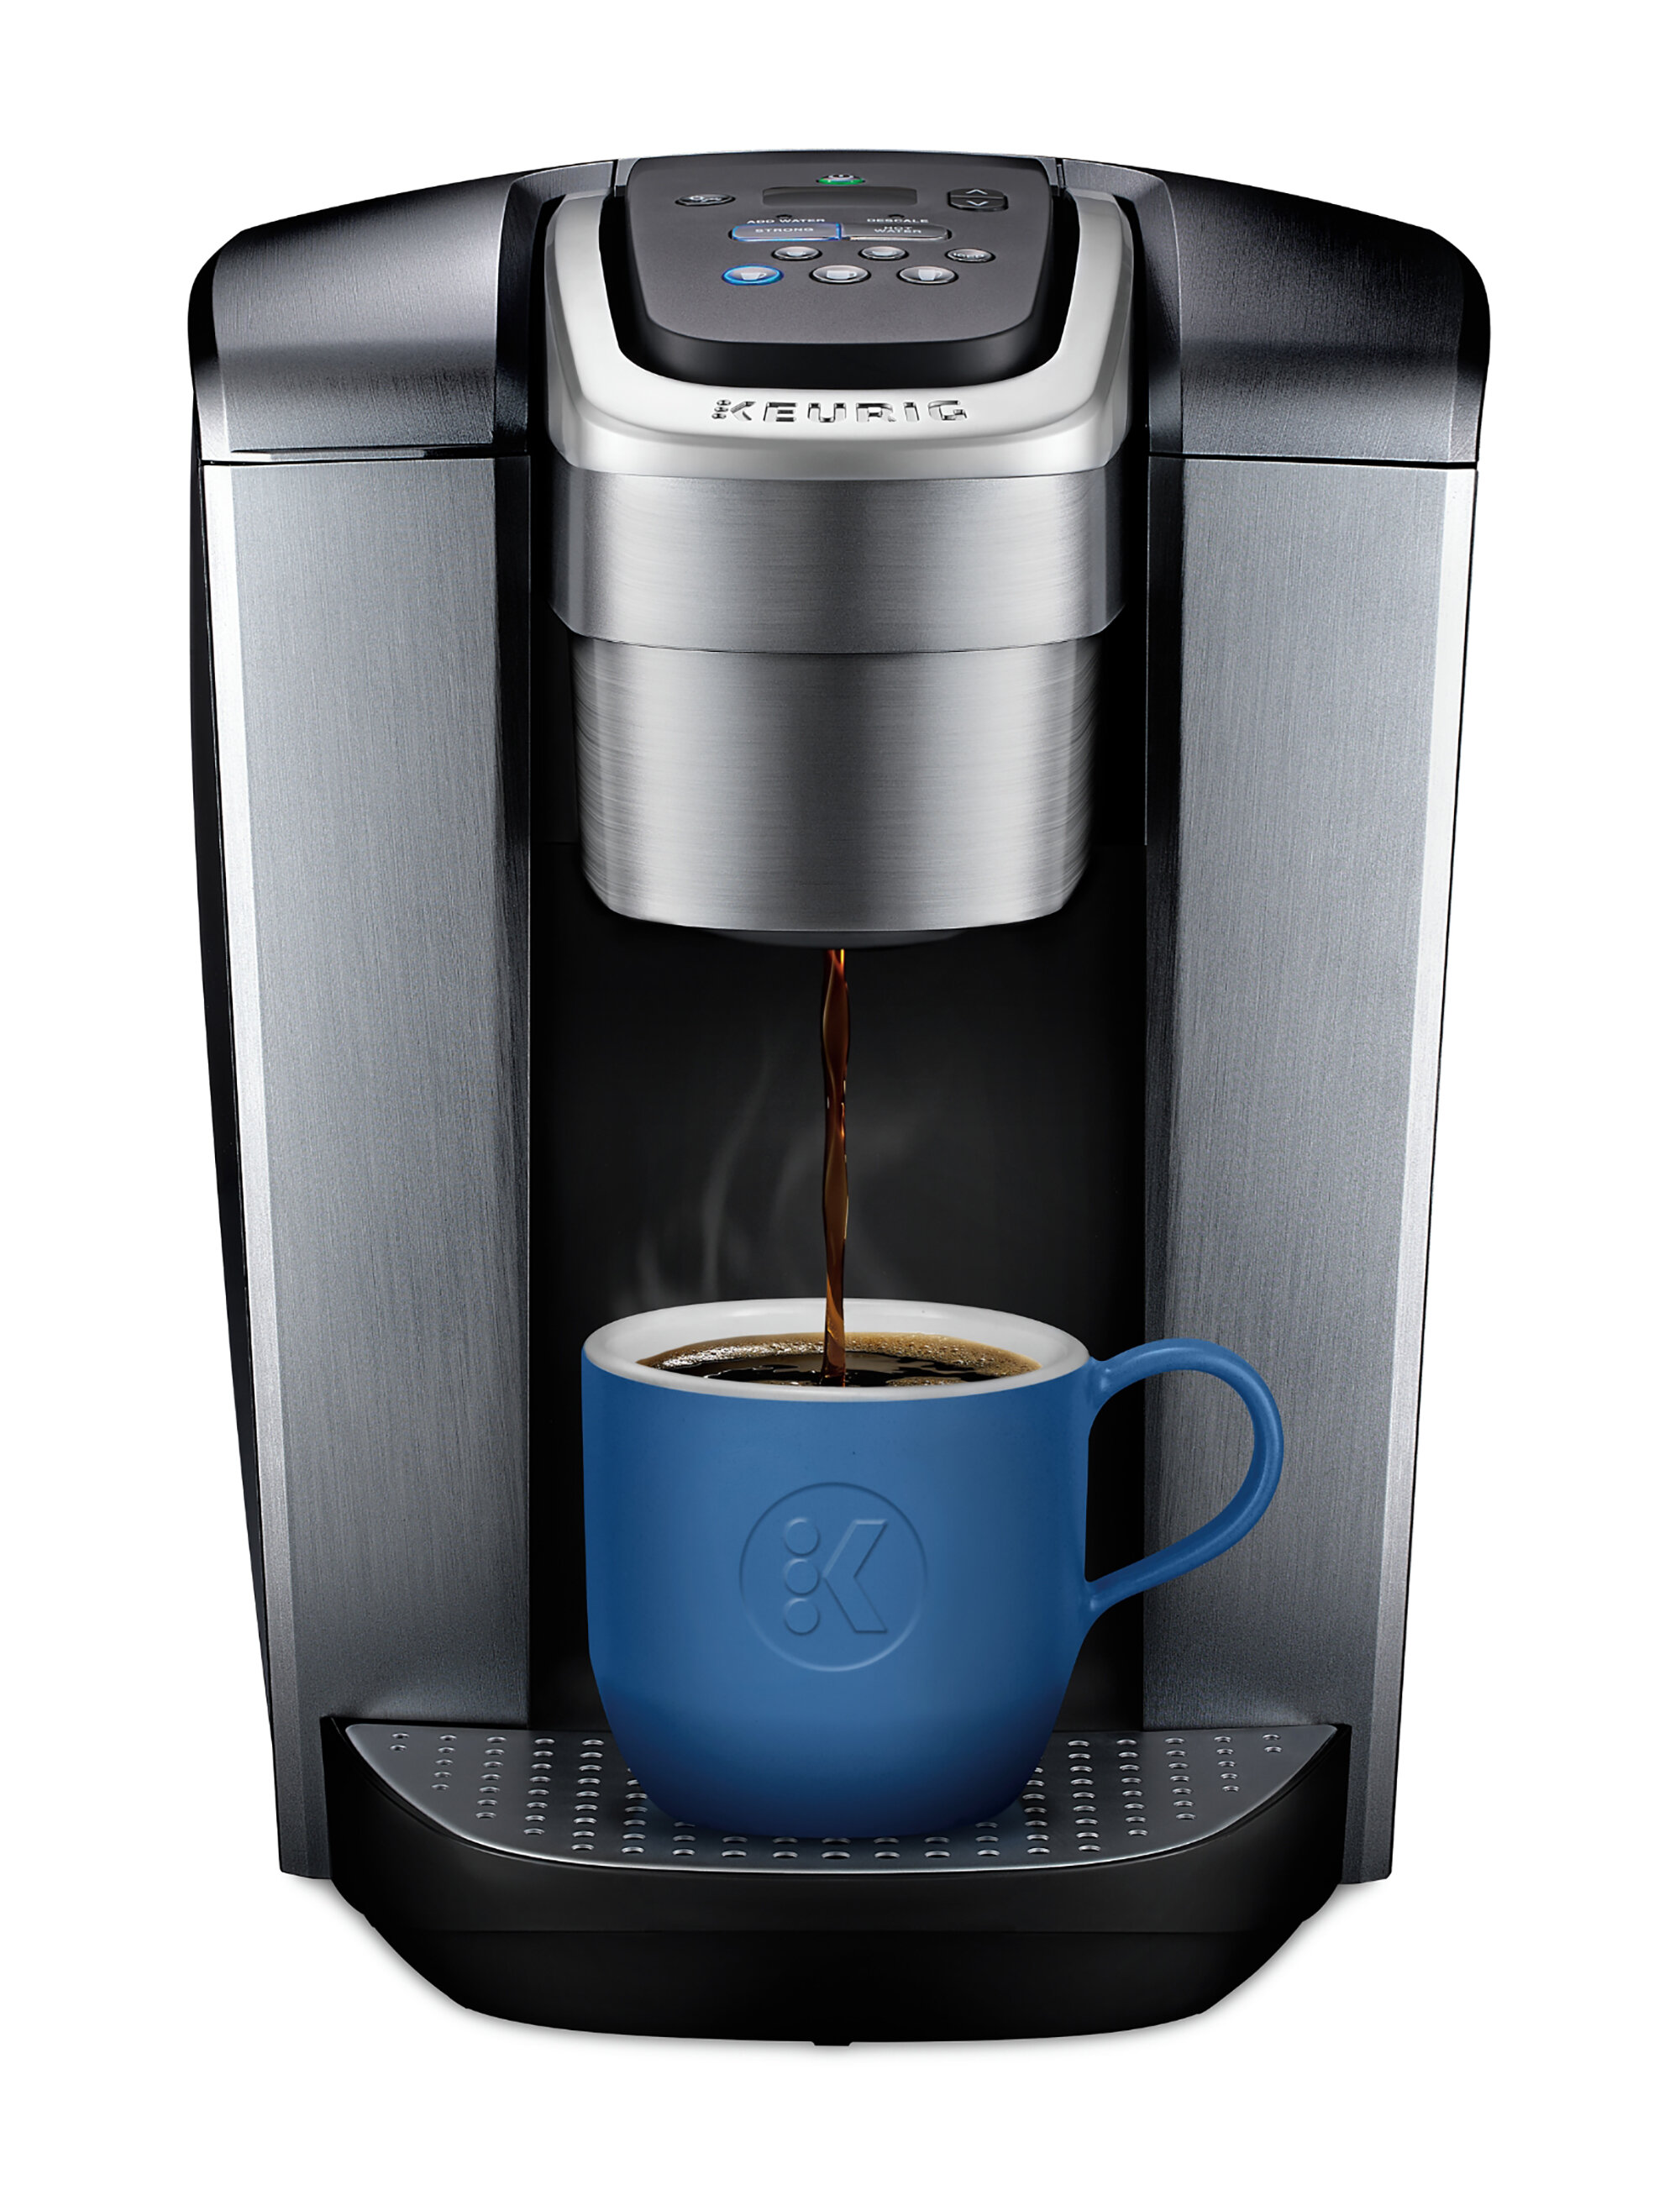 Wayfair Keurig deal: Shop Way Day deals to save on coffee makers